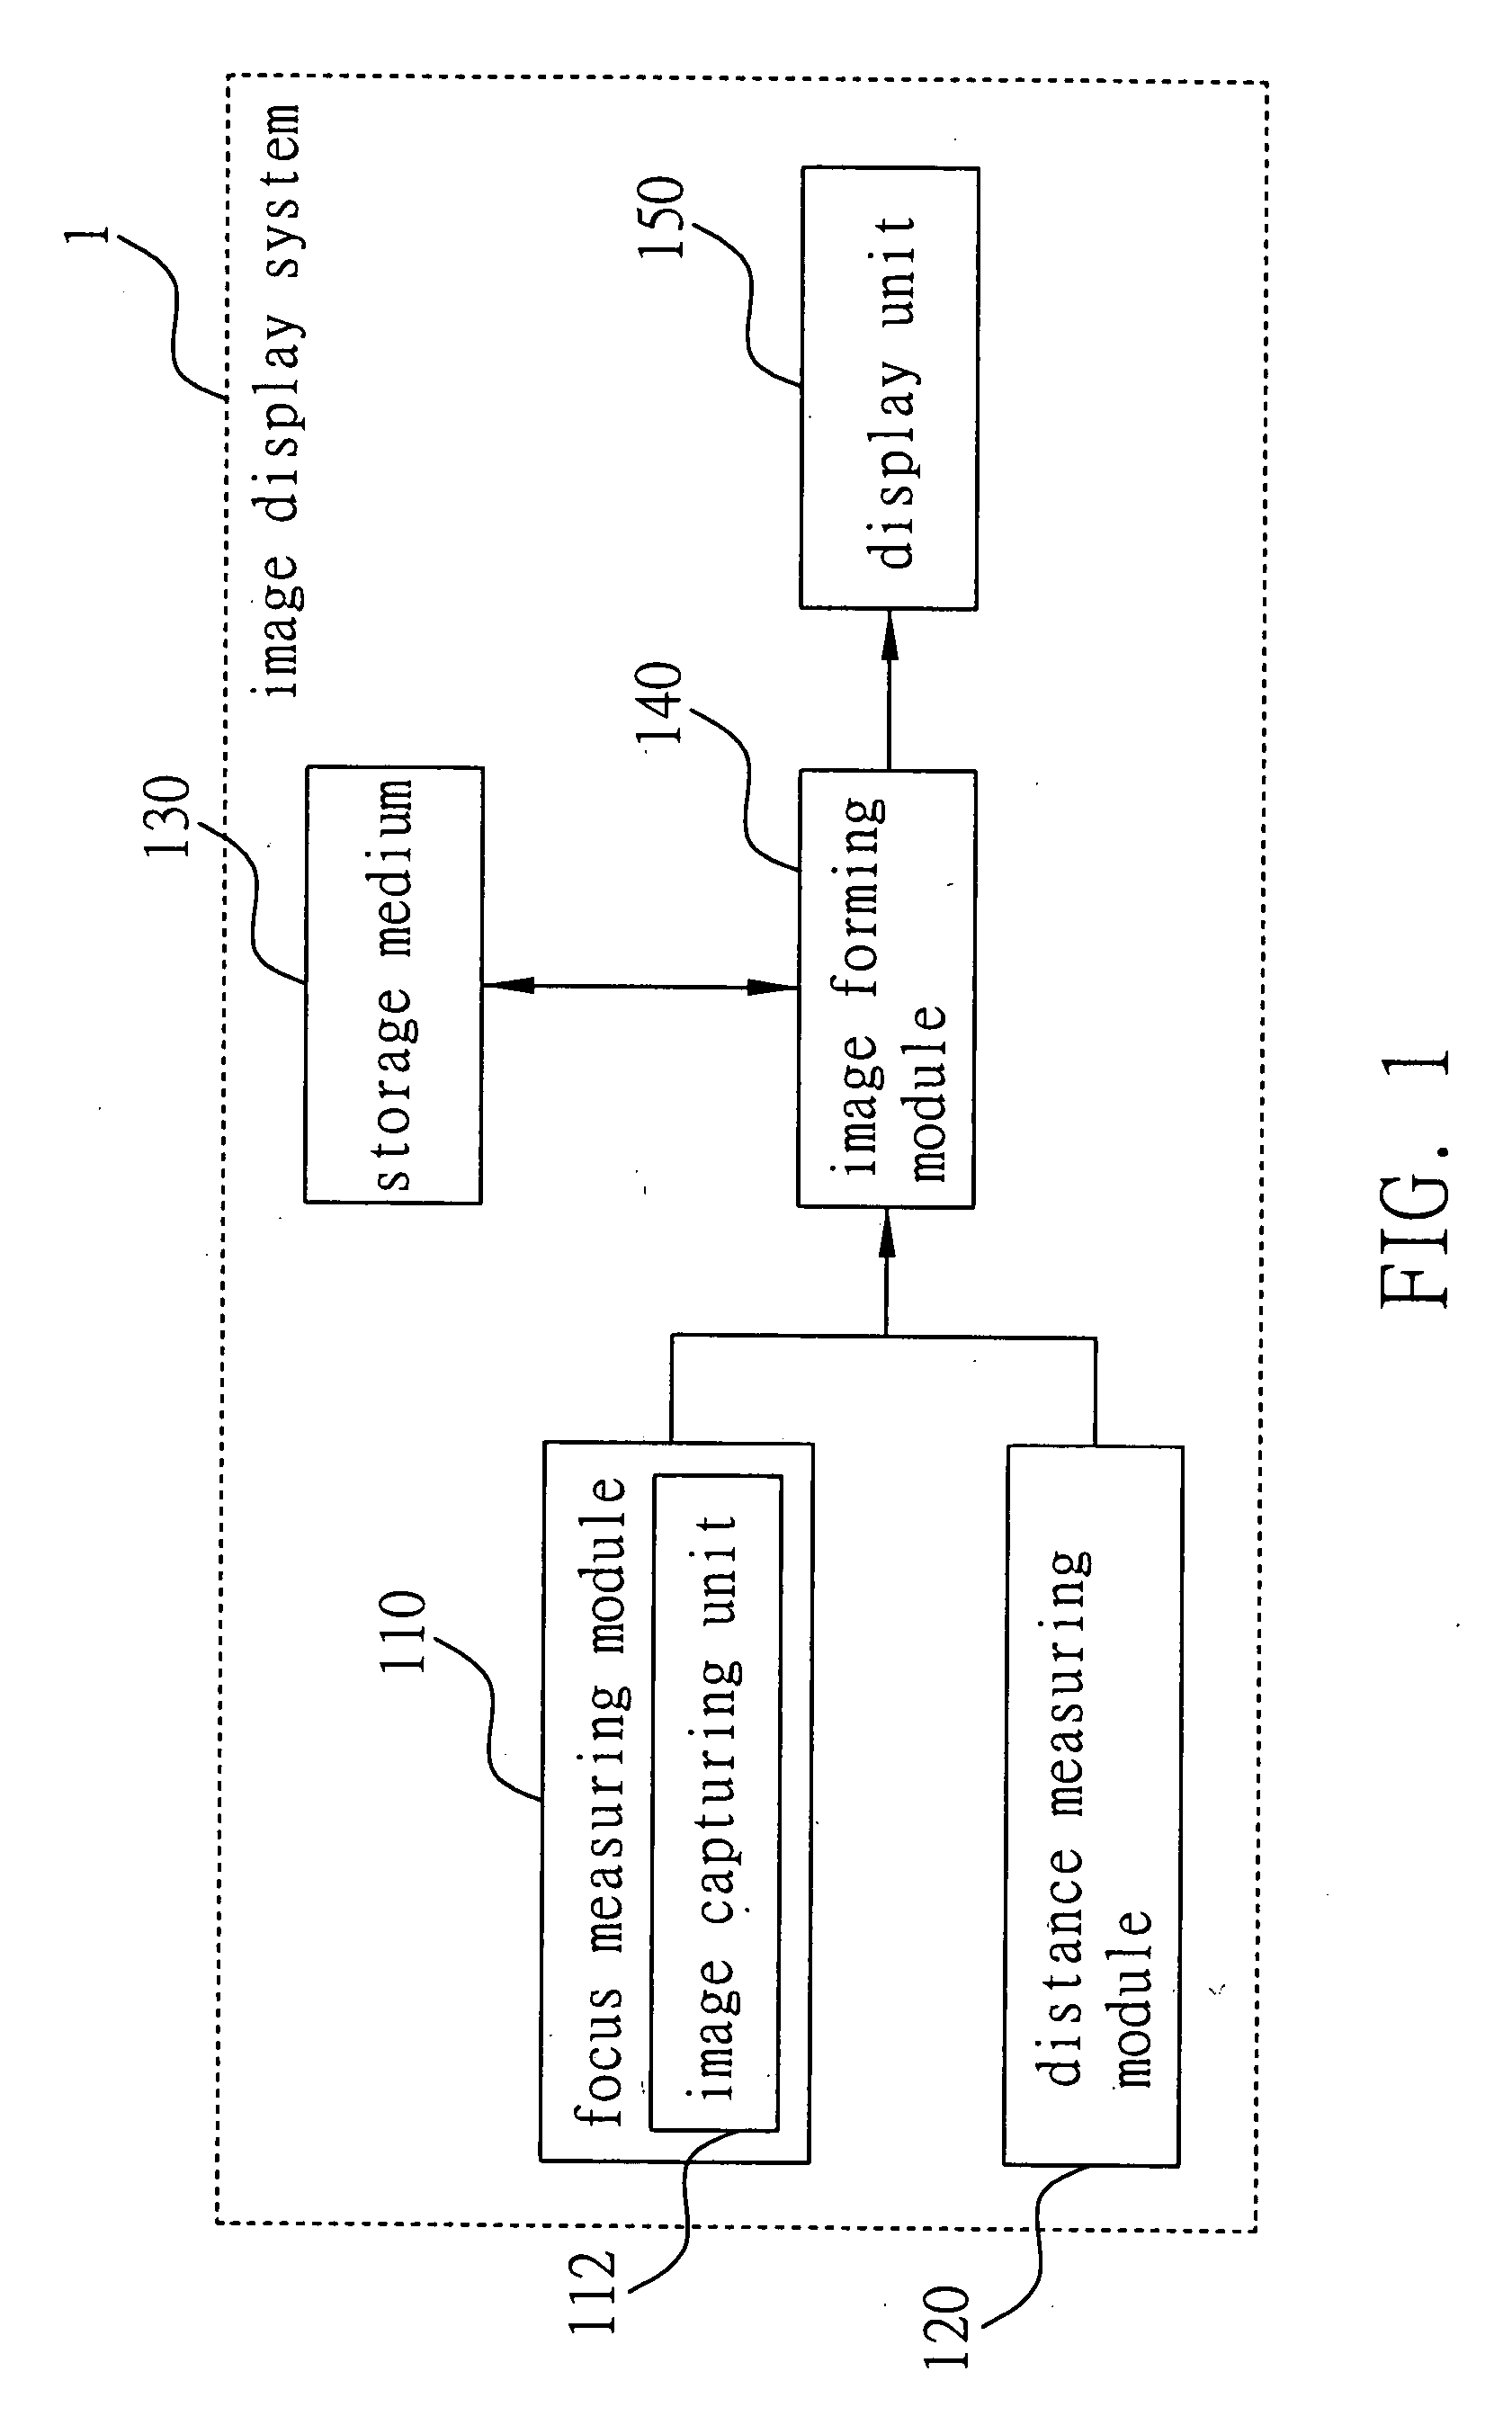 Image display system and method